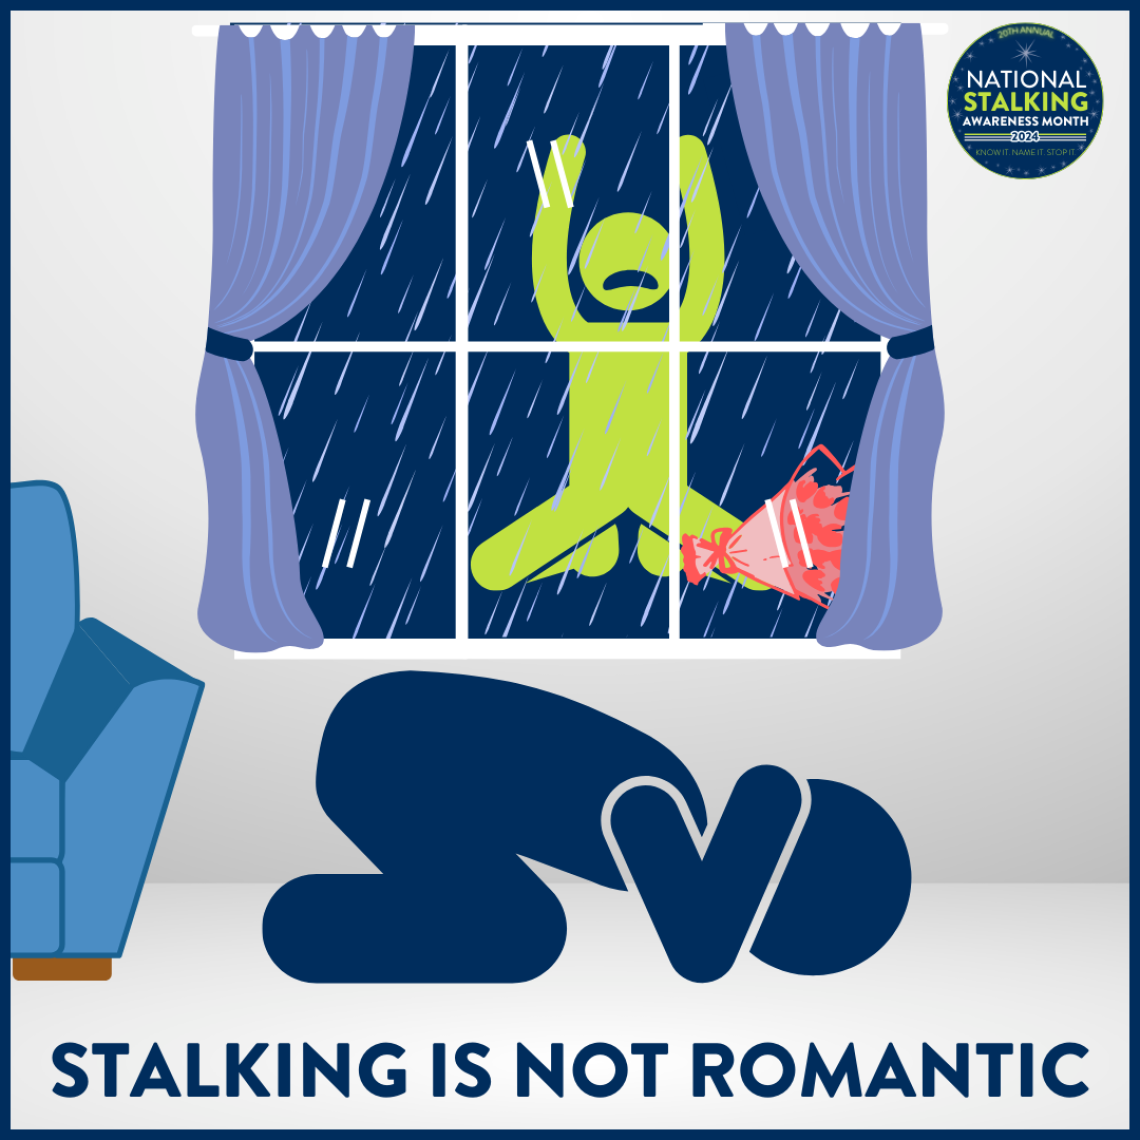 A stalker outside a window with the caption "Stalking is not Romantic."